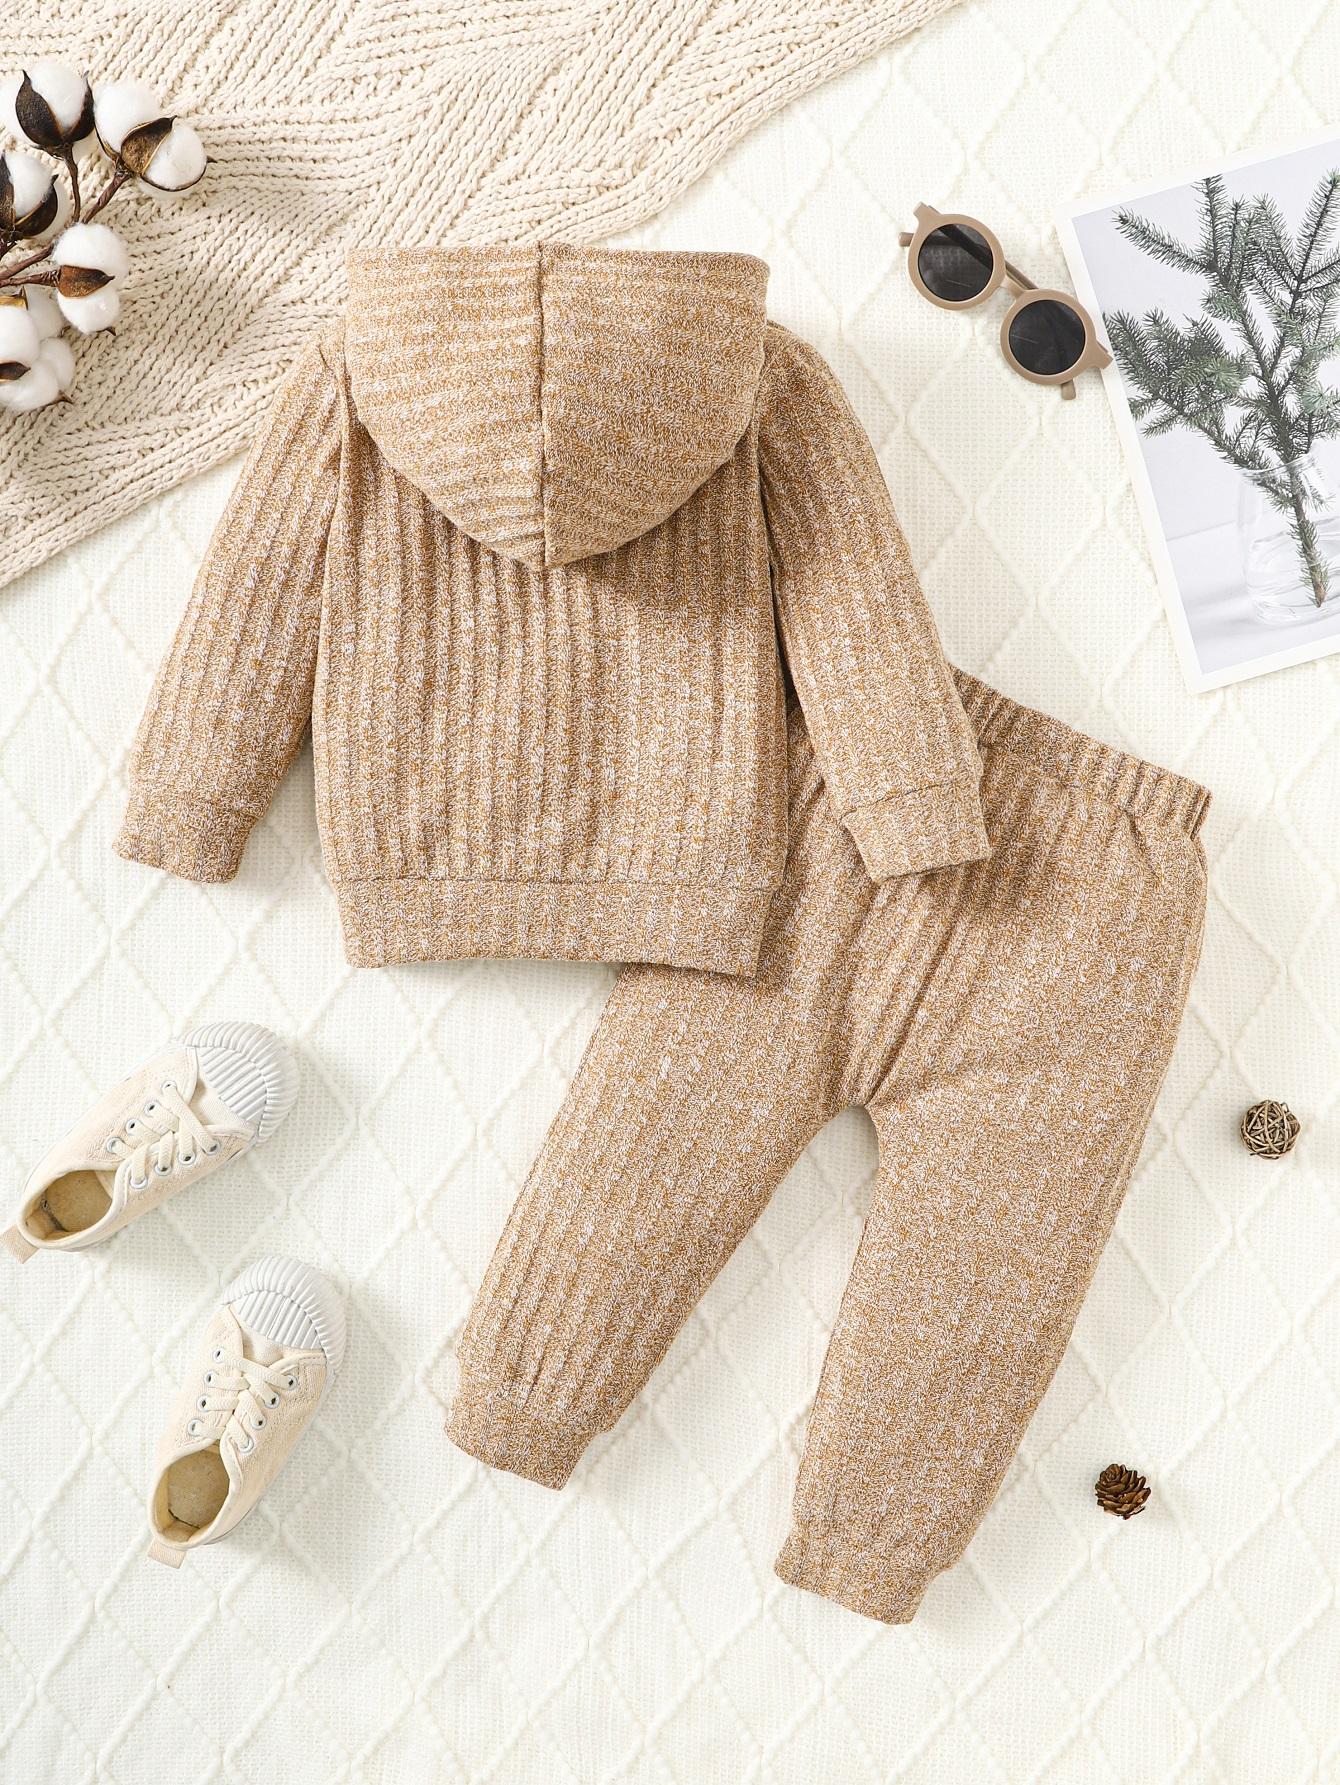 6M-3Y READY STOCK Baby Boys Clothes Solid Color Casual Knitted Long Sleeve Hoodies Tops Elastic Pants 2Pcs Outfits Size: 6M-3Y Light Brown Catpapa 462308181